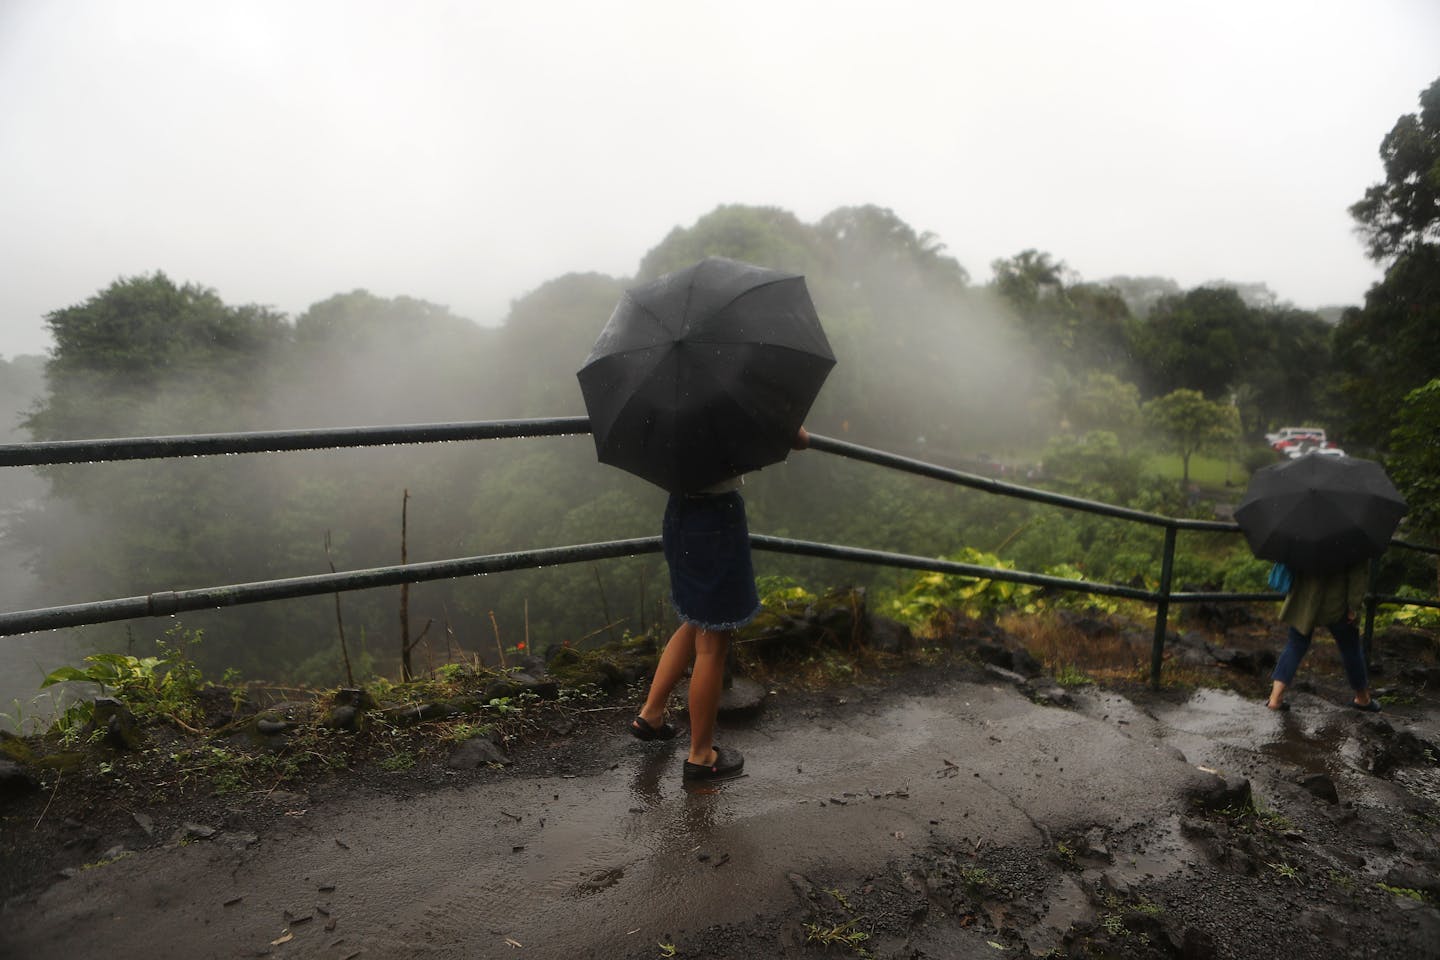 A person walks with an umbrella on a rain soaked trail.